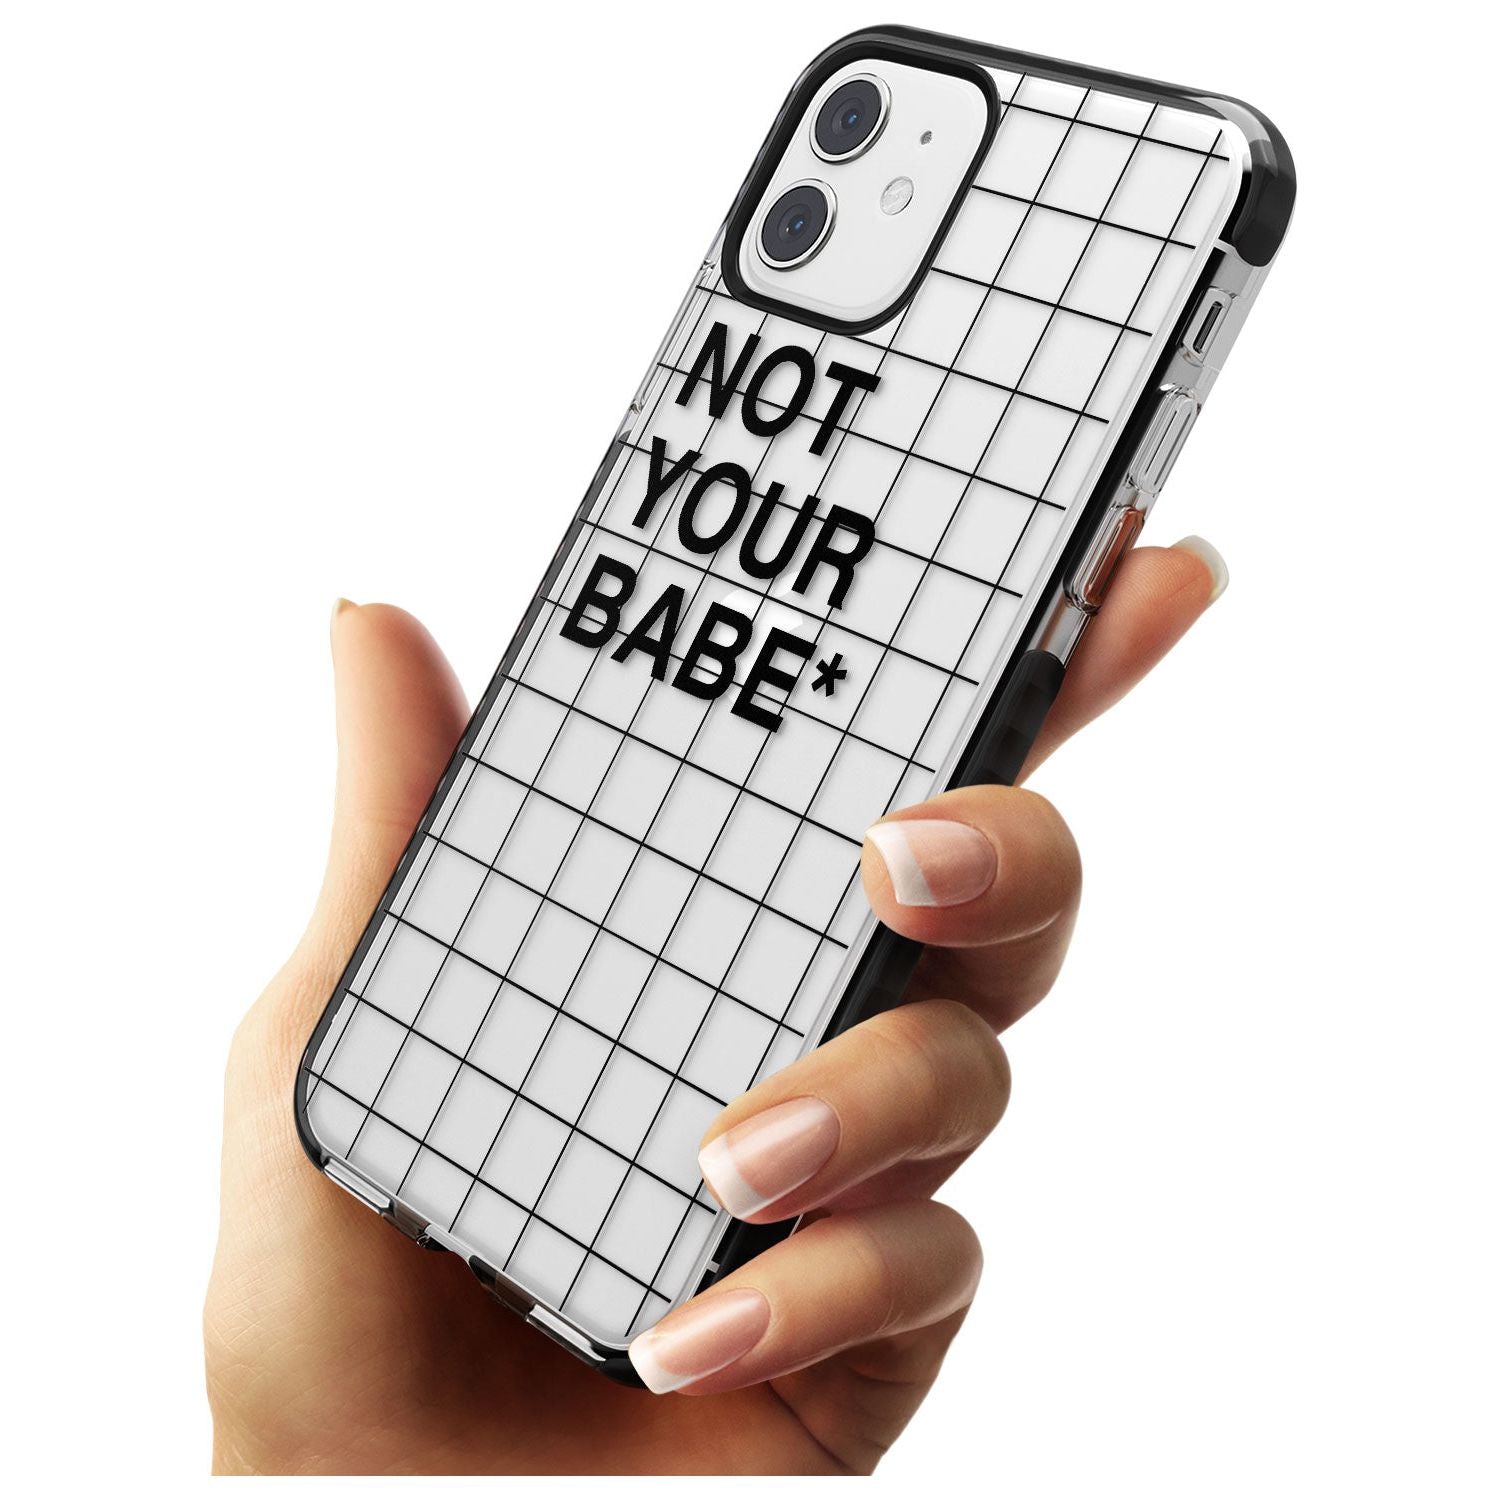 Grid Pattern Not Your Babe Black Impact Phone Case for iPhone 11